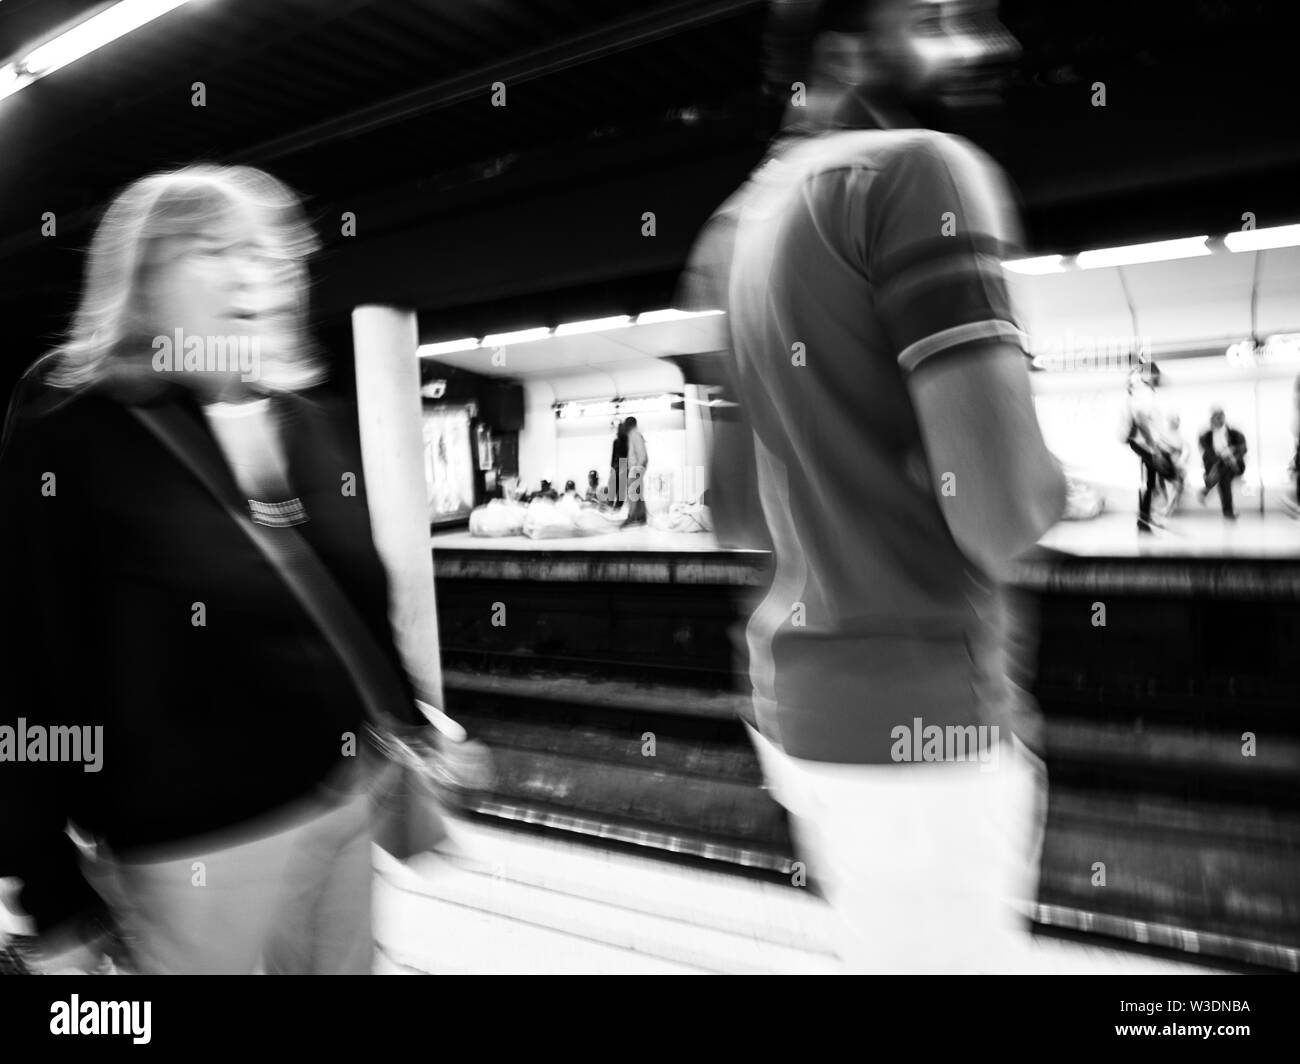 Defocused blur people silhouettes walking inside Barcelona Metro station with silhouettes of homeless migrants sleeping on the train platform - black and white. Stock Photo